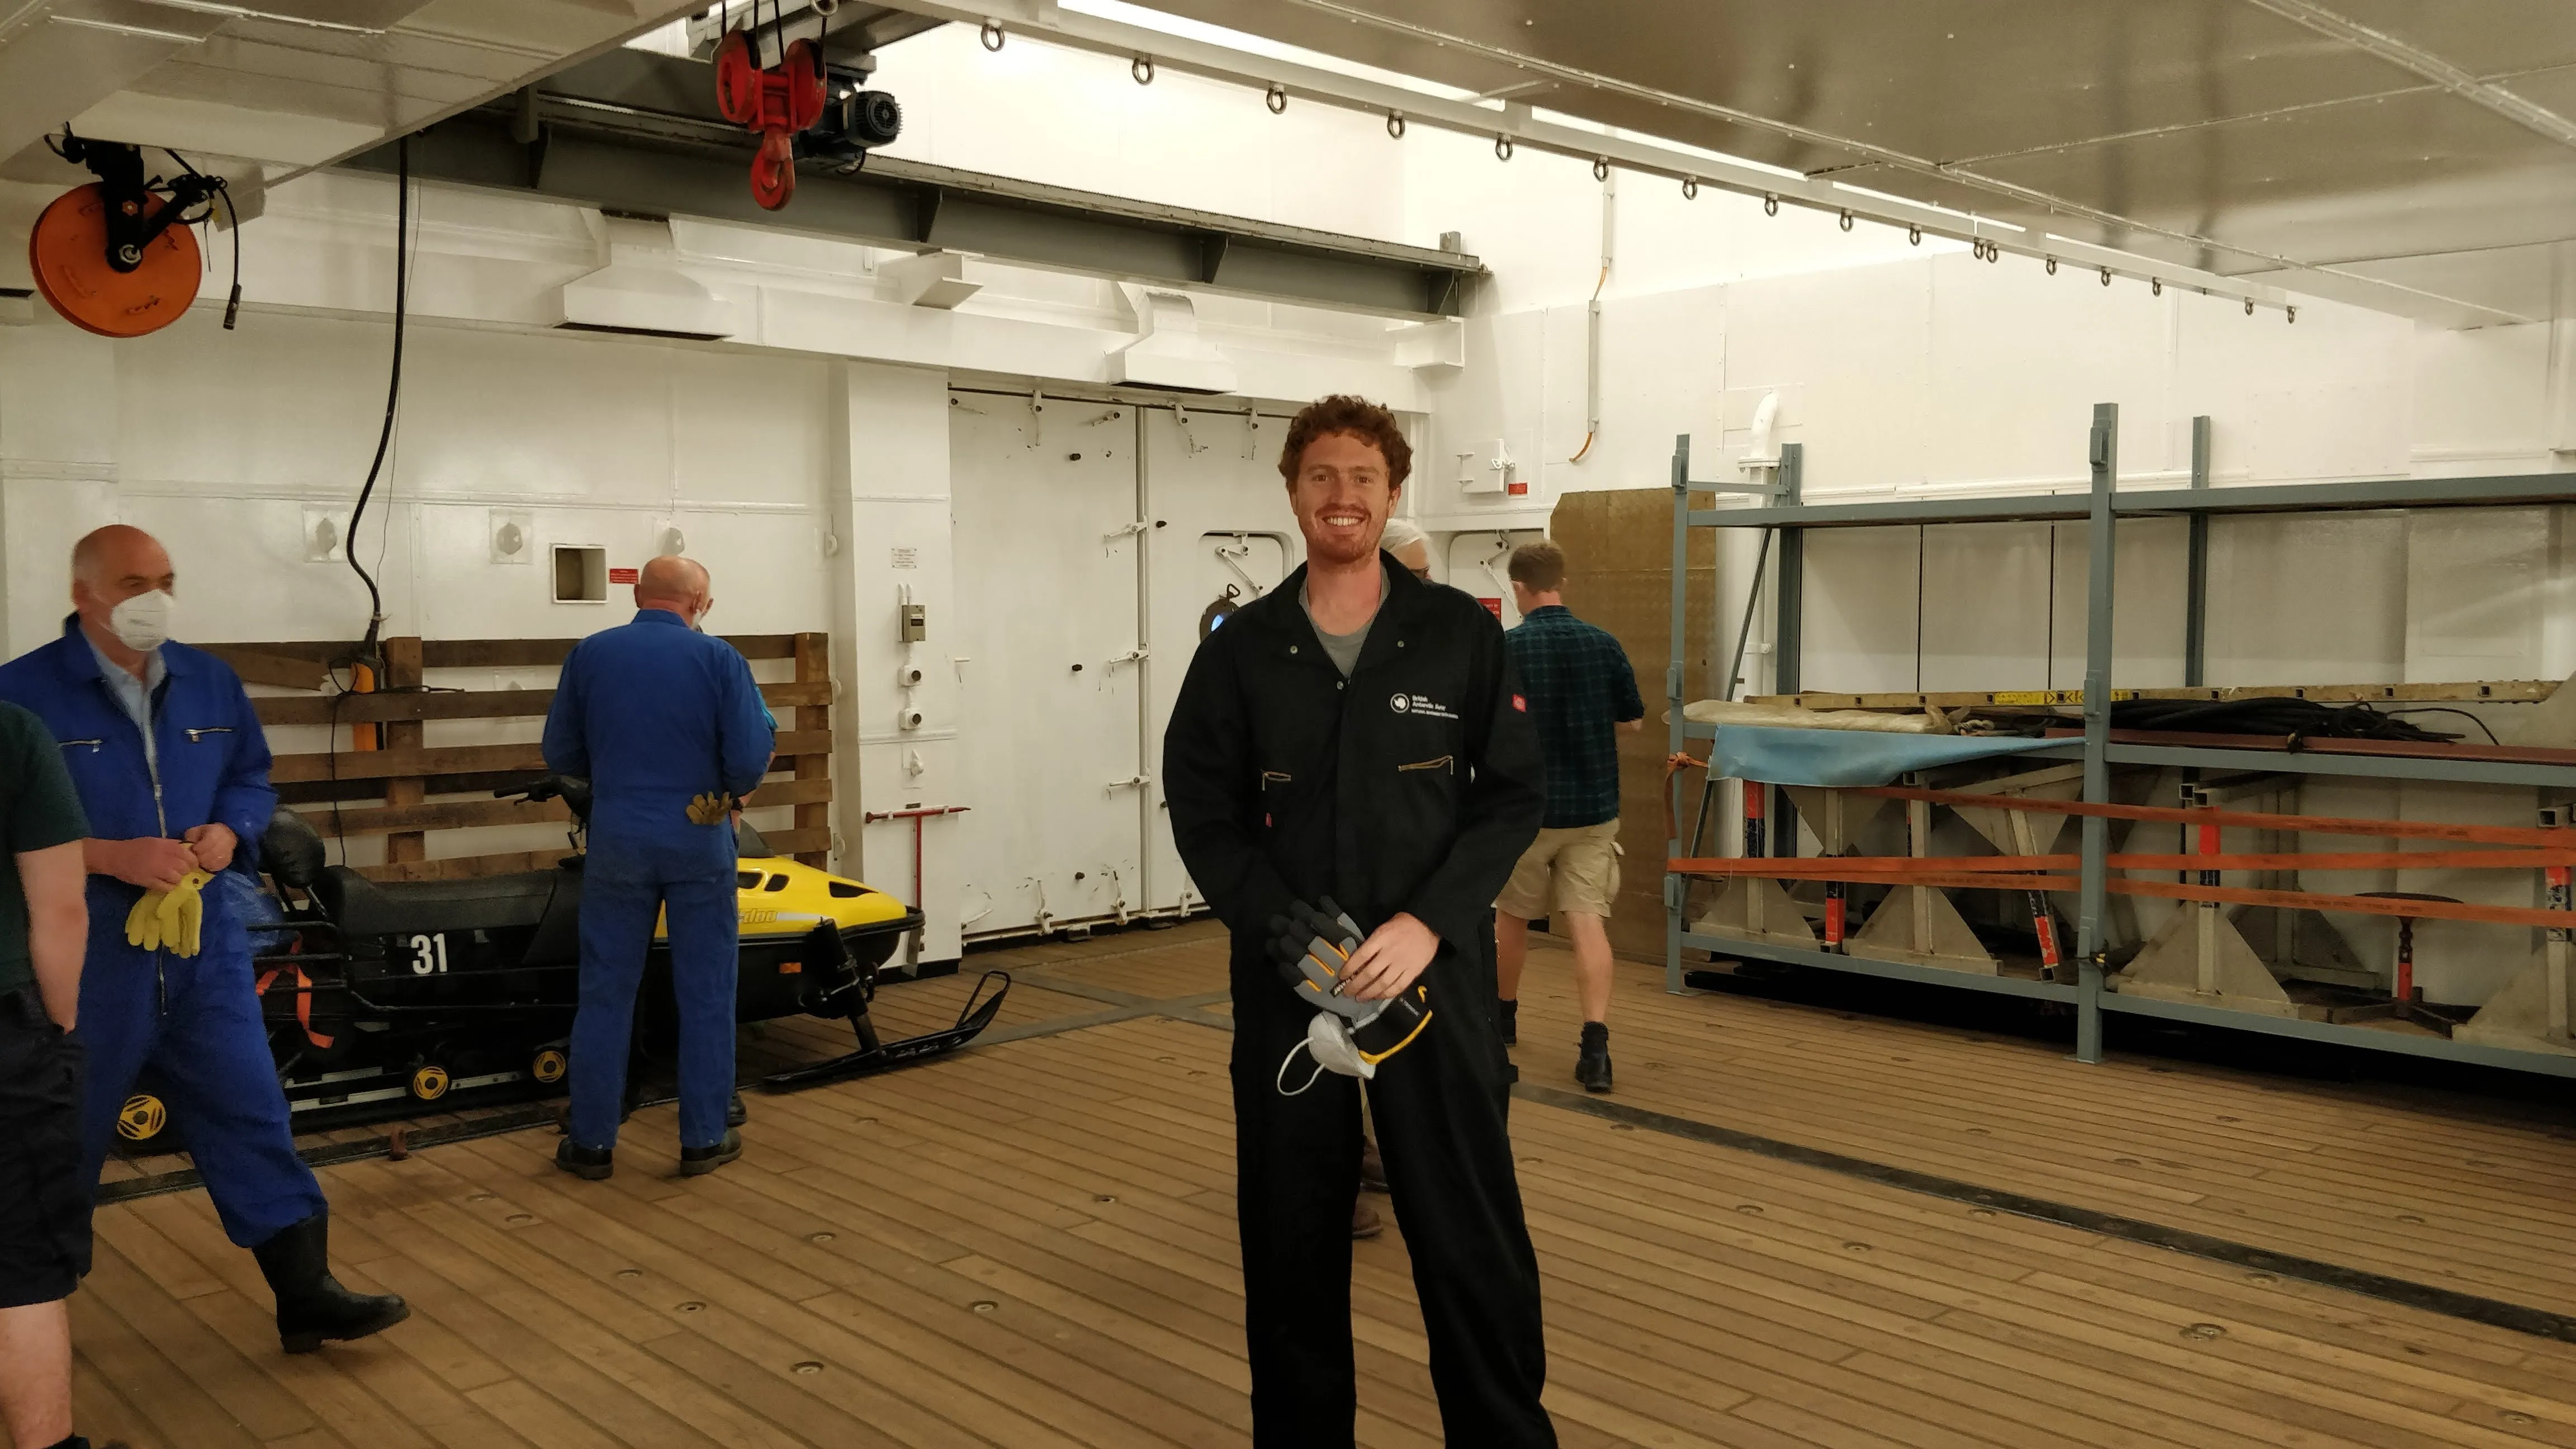 Photo of a man in a black boiler suit in a large space with wooden floor and white walls. Other people and some equipment are also in the room.